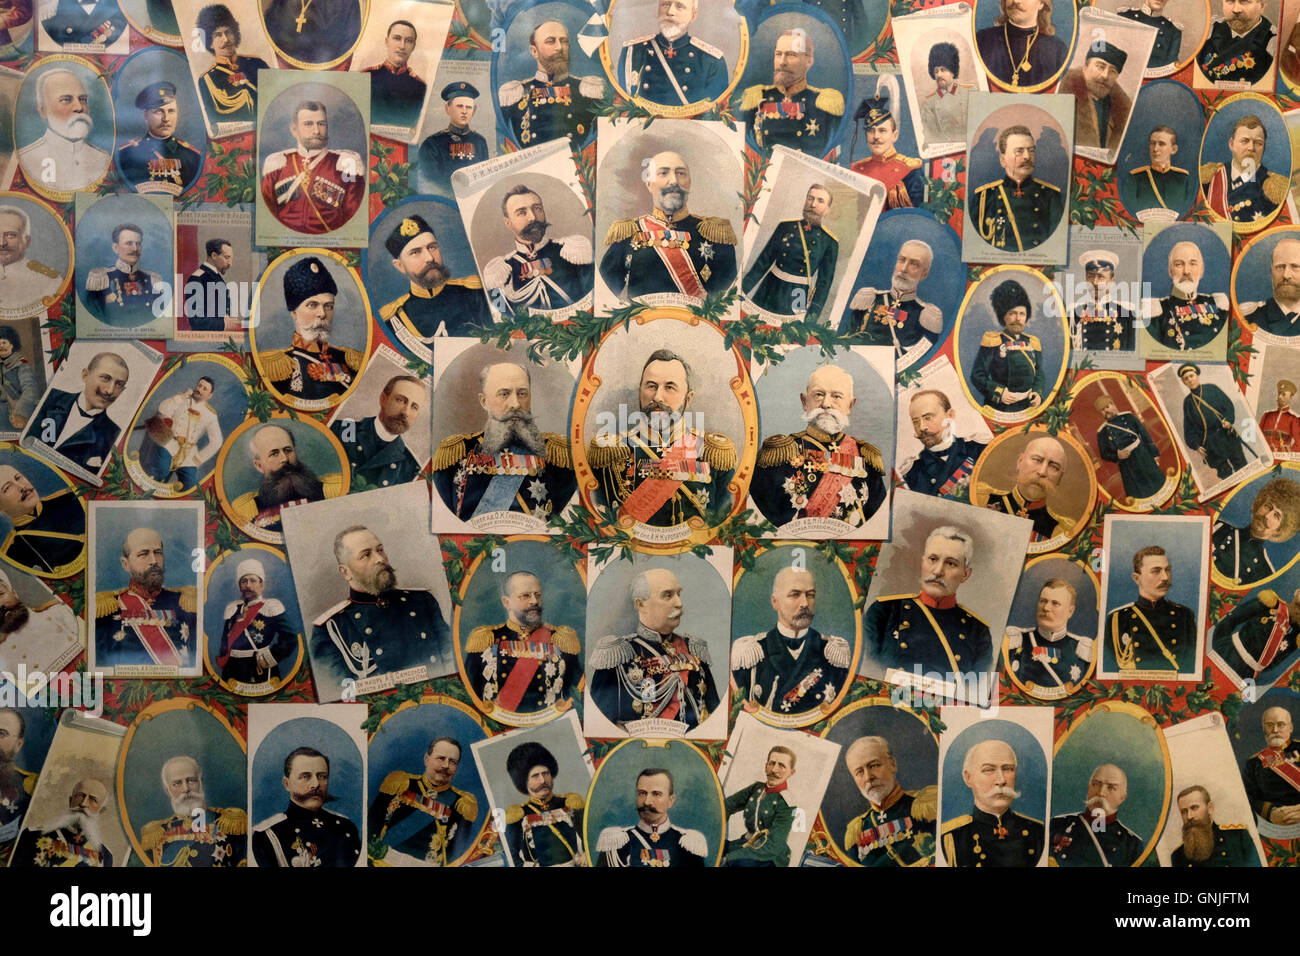 Exhibit depicting Russian rulers and nobles at the State Central Museum of Contemporary History of Russia in Moscow Russia Stock Photo